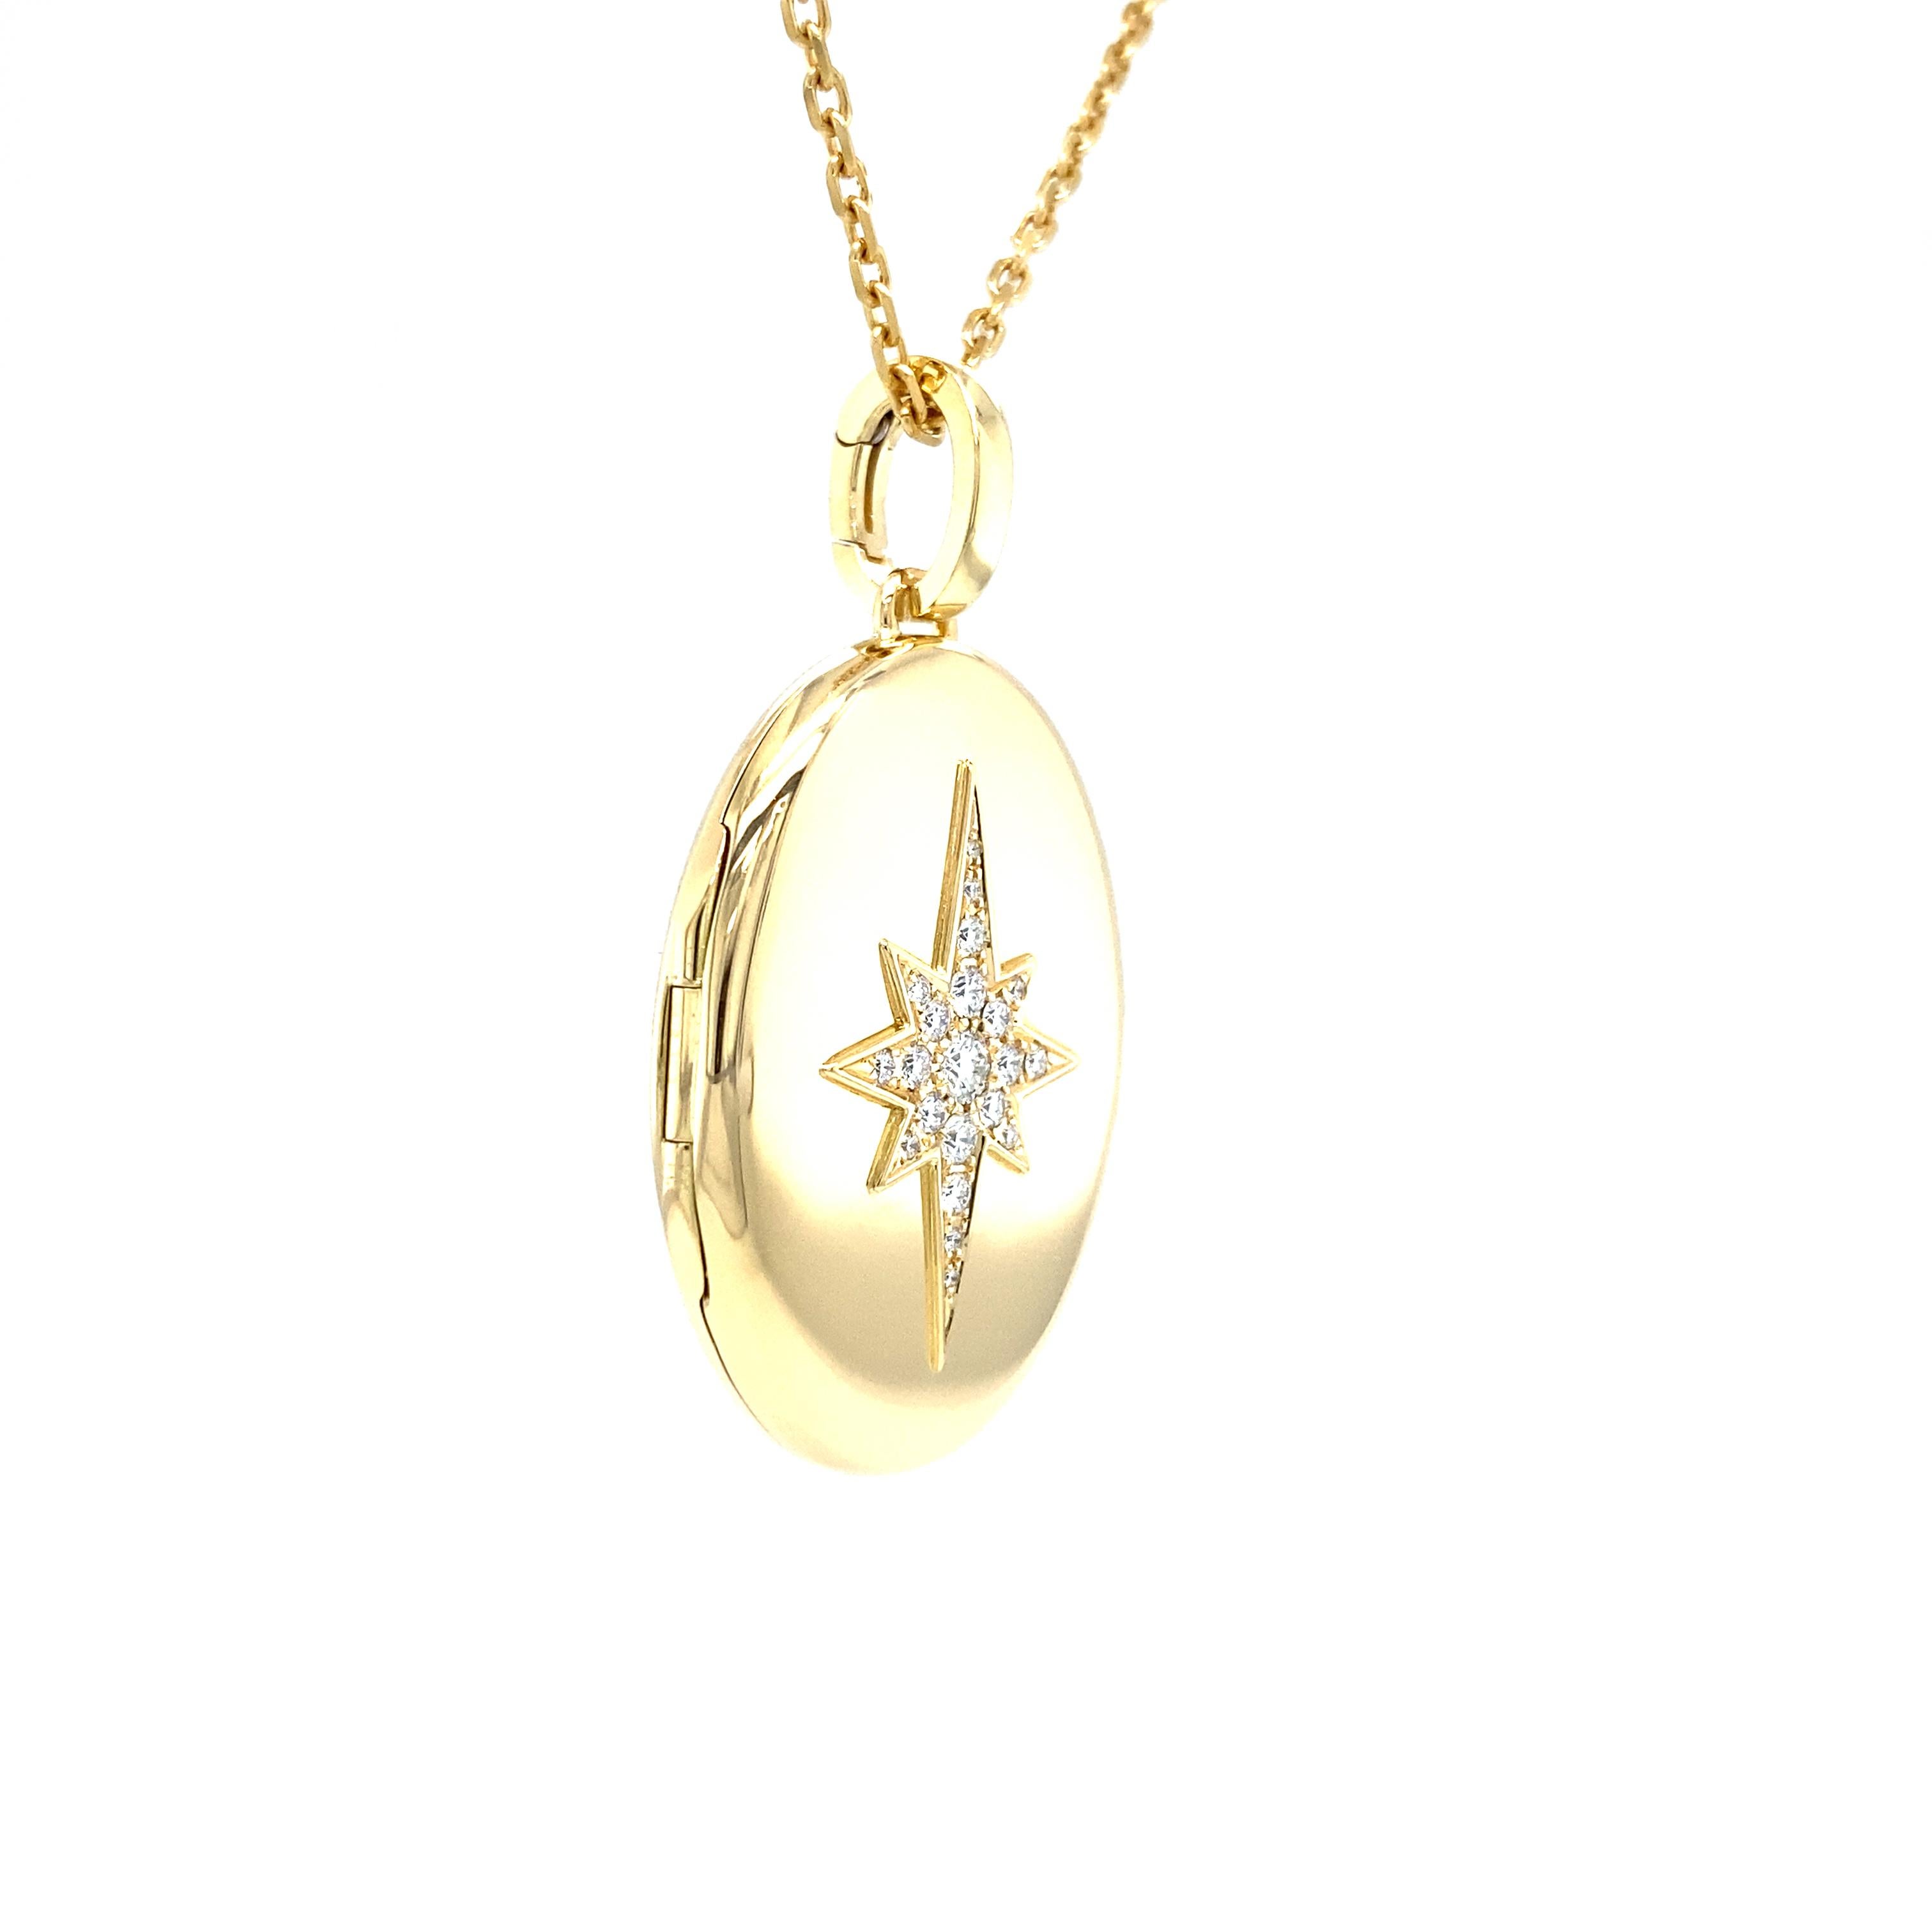 Oval Polished Locket Pendant Necklace - 18k Yellow Gold - 9 Diamonds 0.14ct G VS For Sale 9